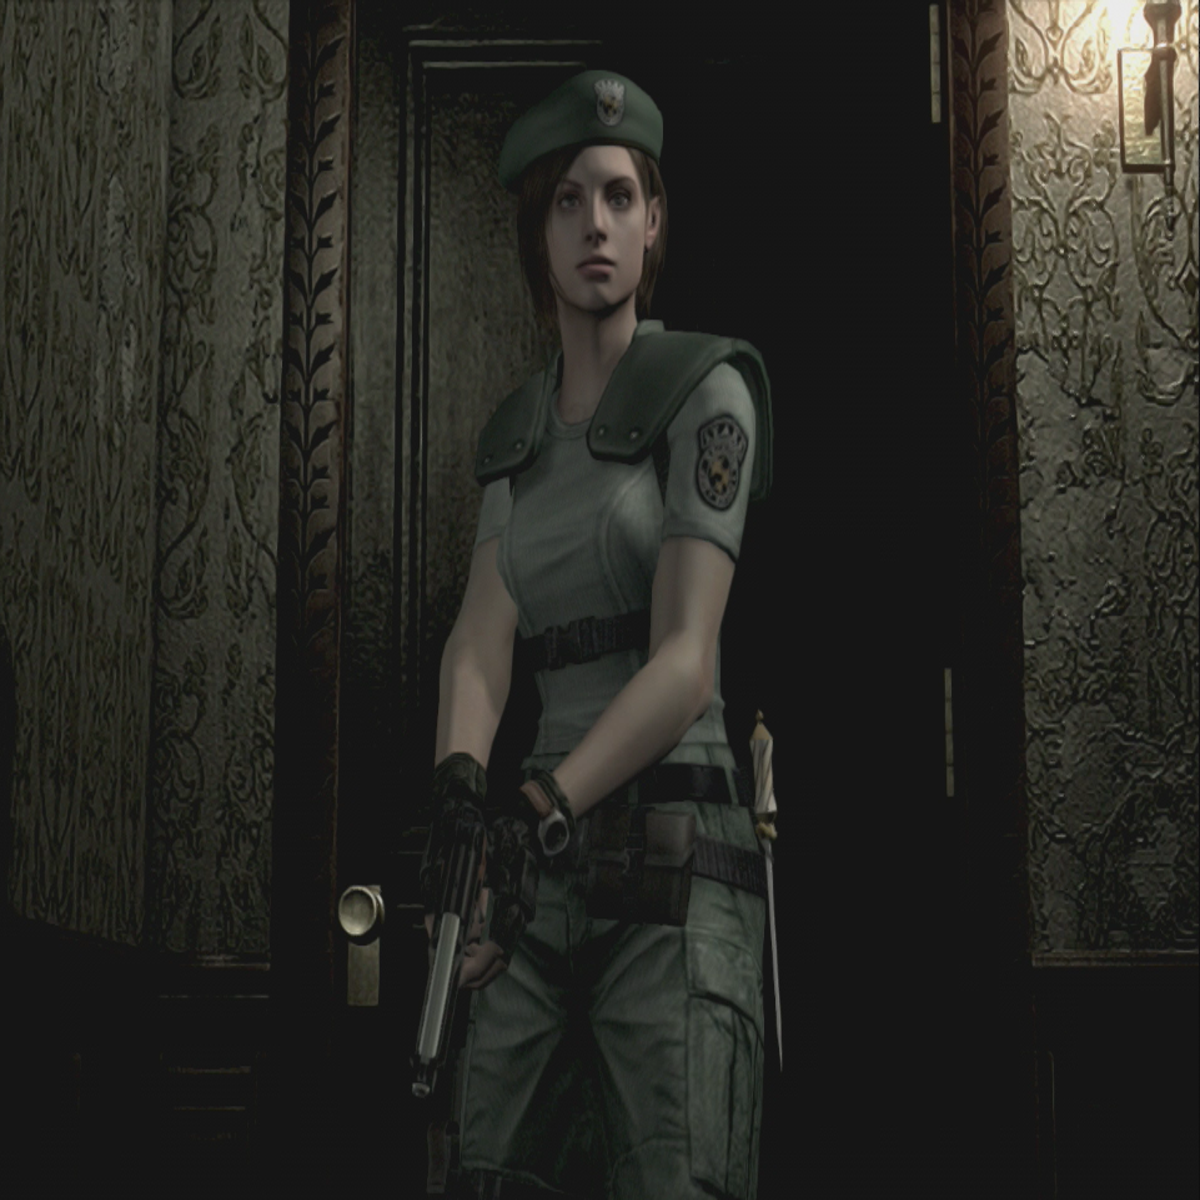 Resident Evil HD supports cross-buy on PS3 and PS4, only if pre